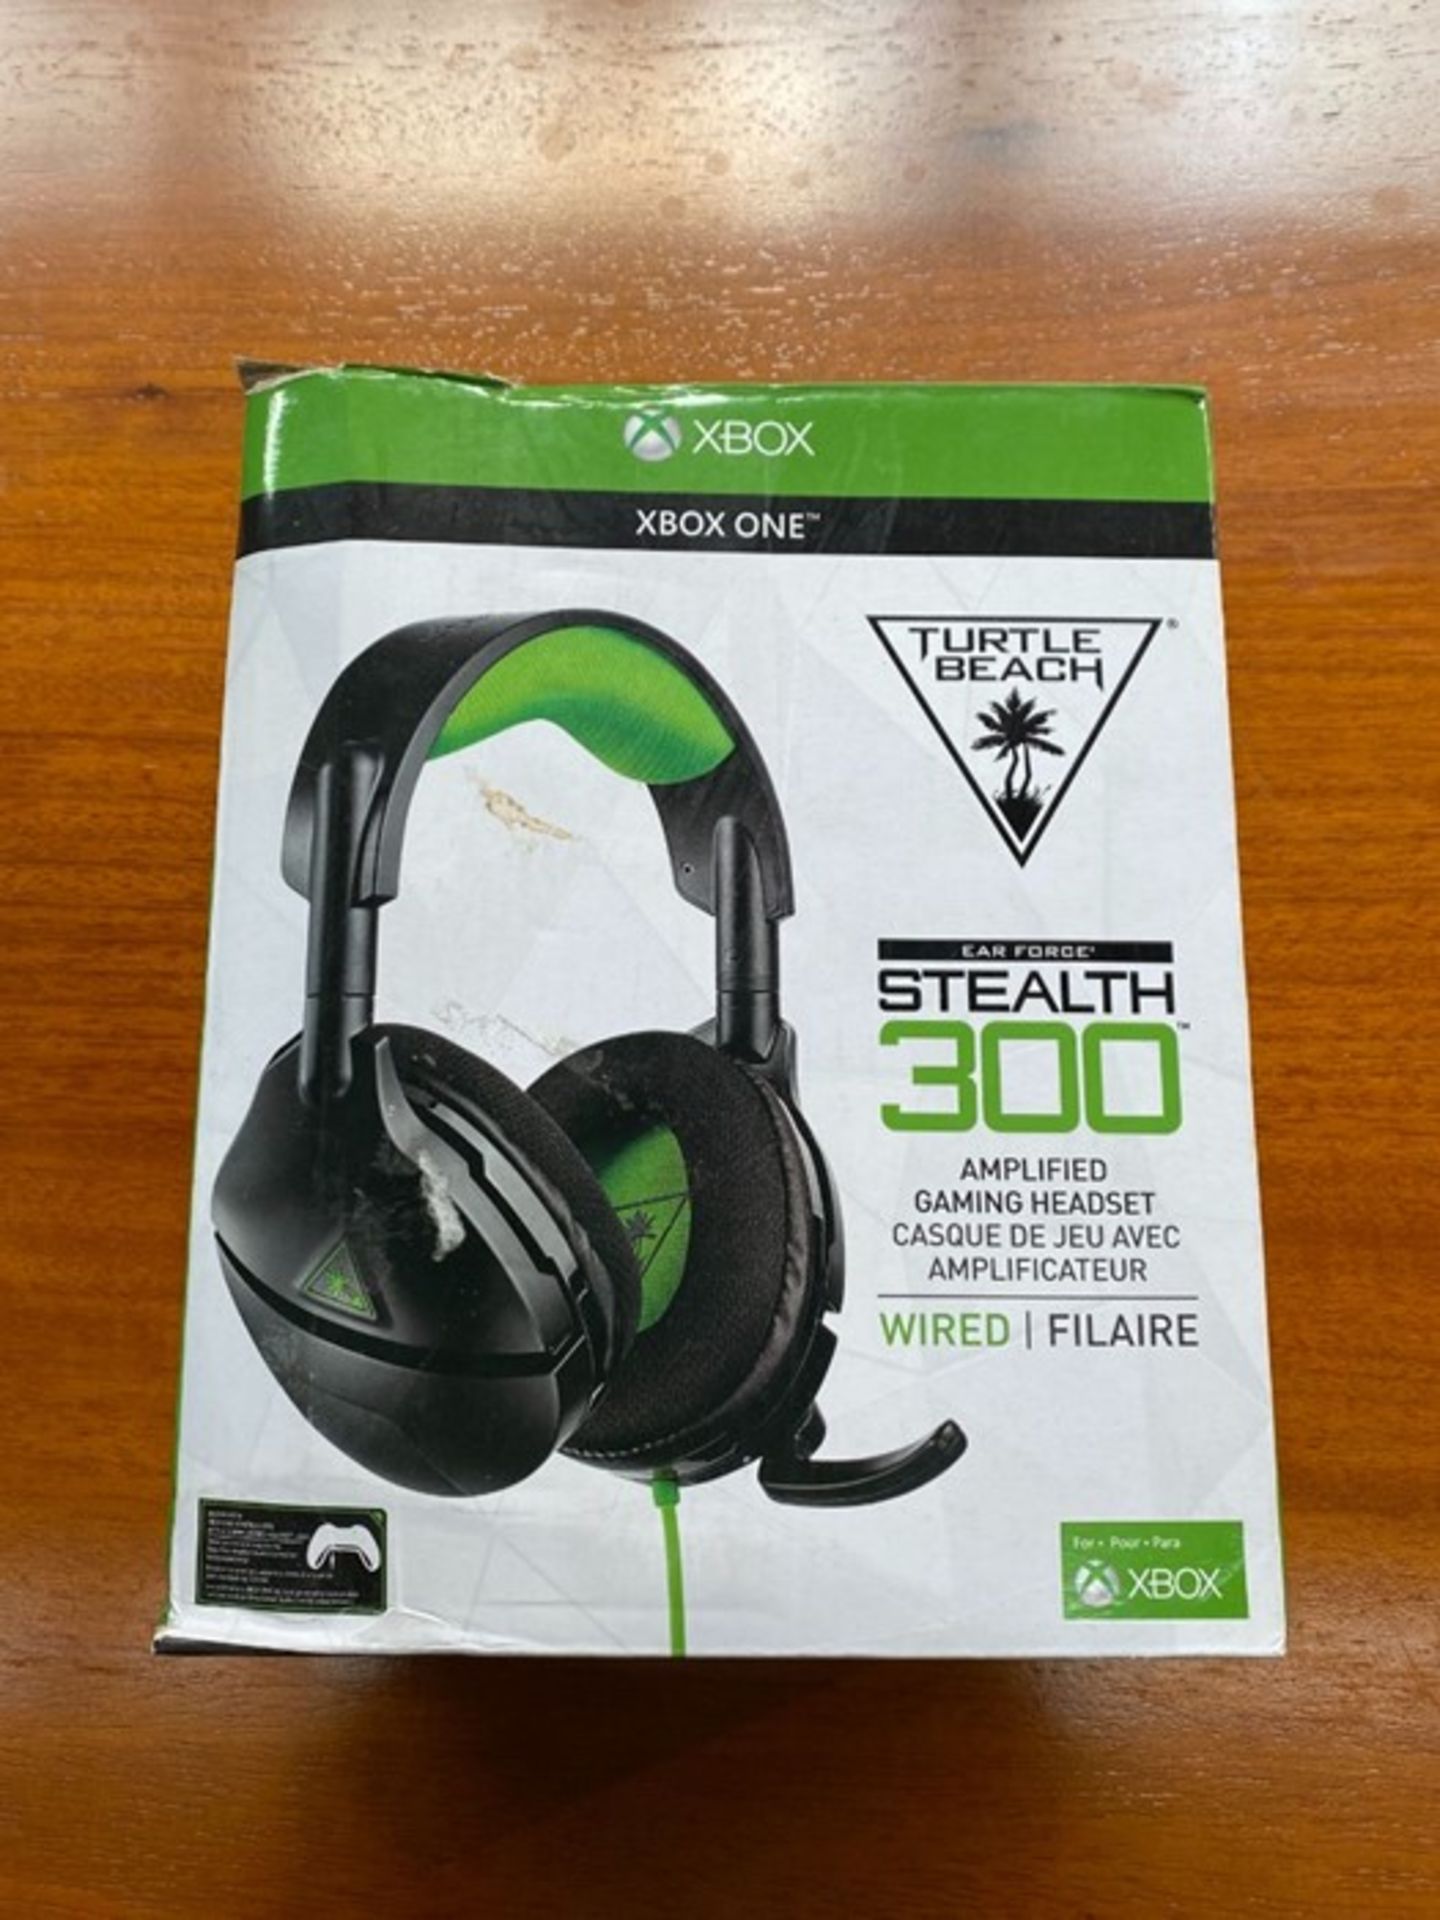 ONE LOT TO CONTAIN ONE BOXED XBOX ONE TURTLE BEACH STEALTH 300 HEADSET UNTESTED CUSOMER RETURNS